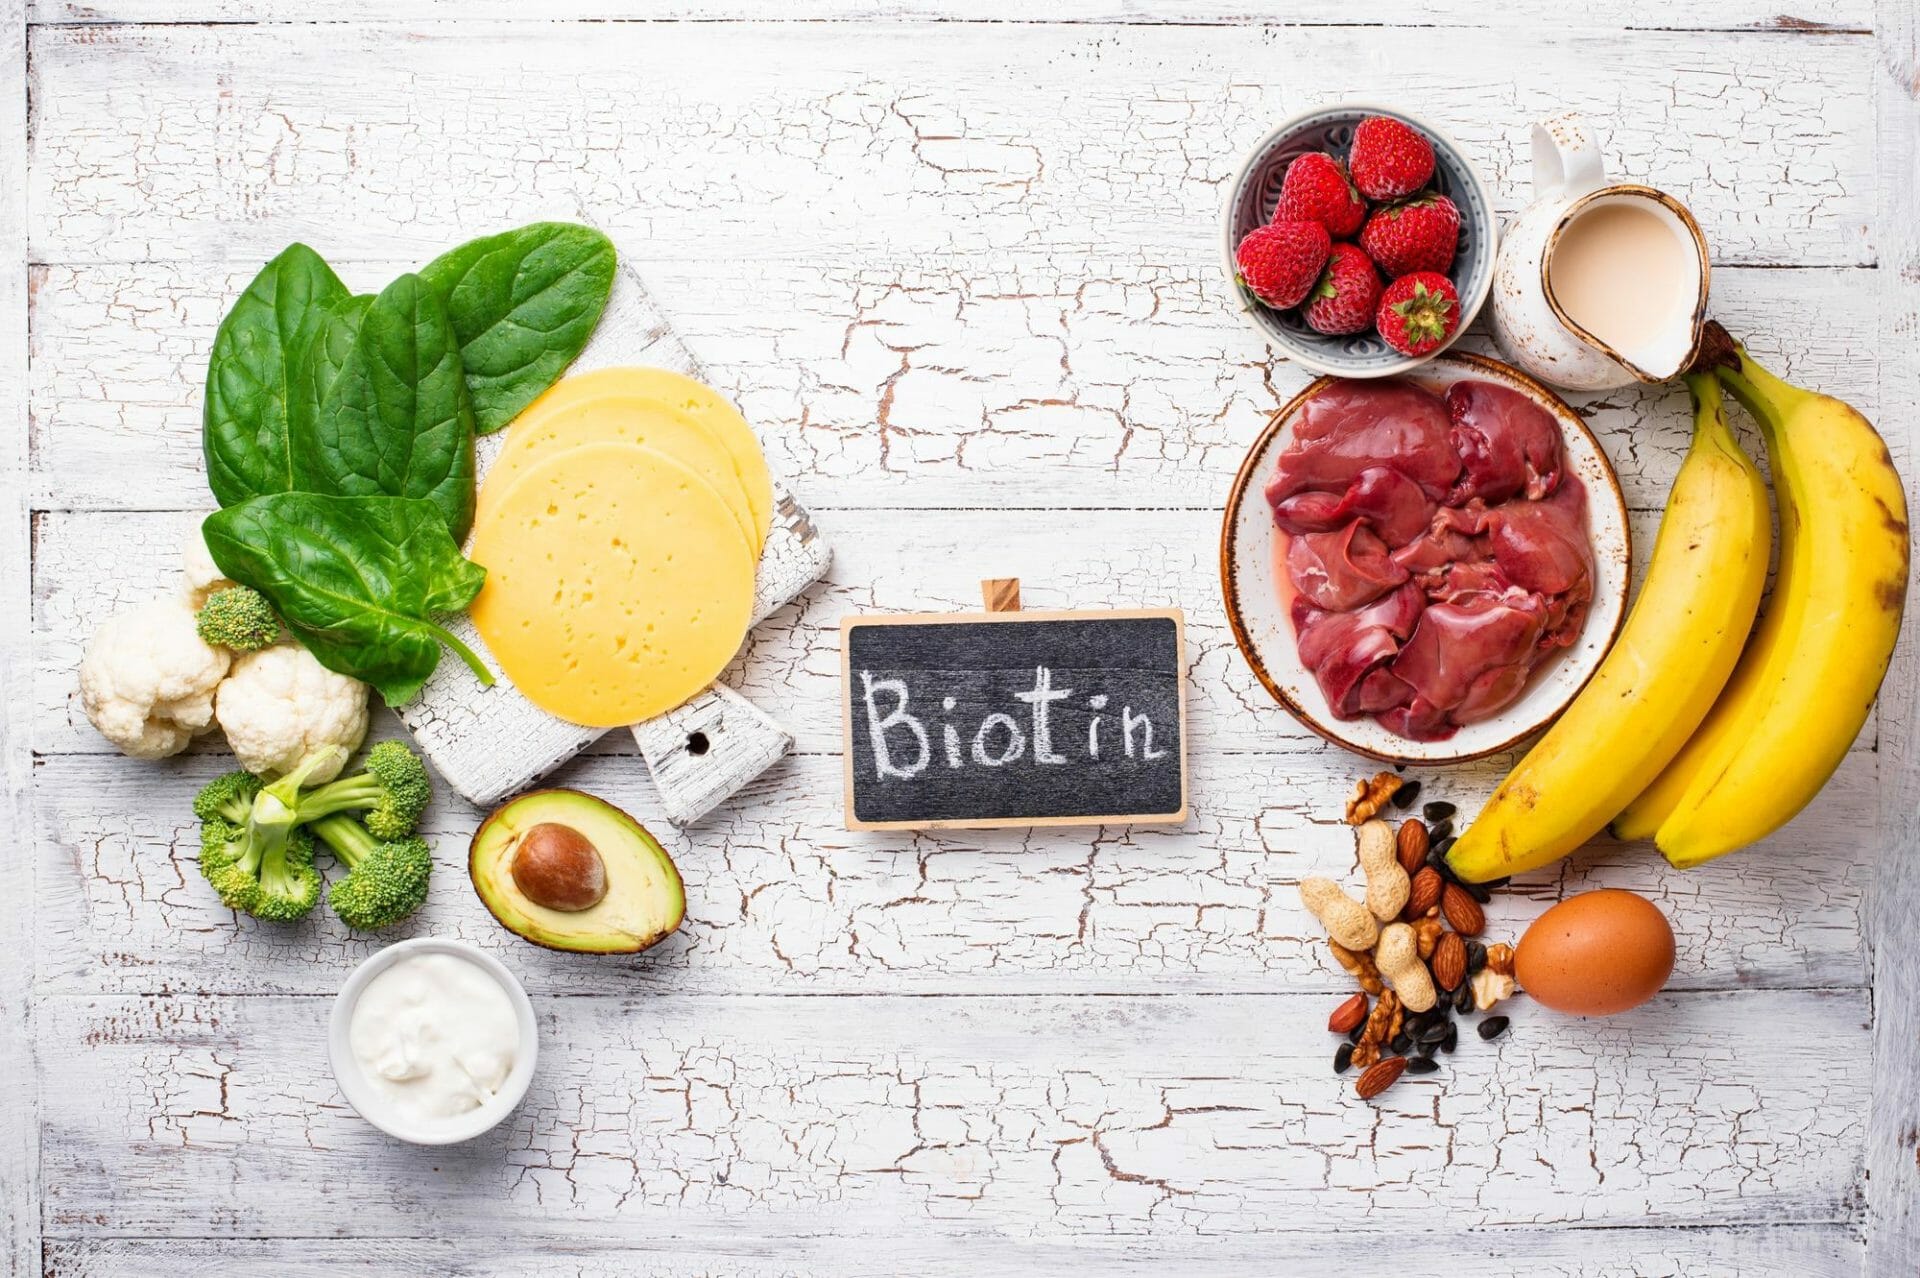 Biotin and its role in a healthy life